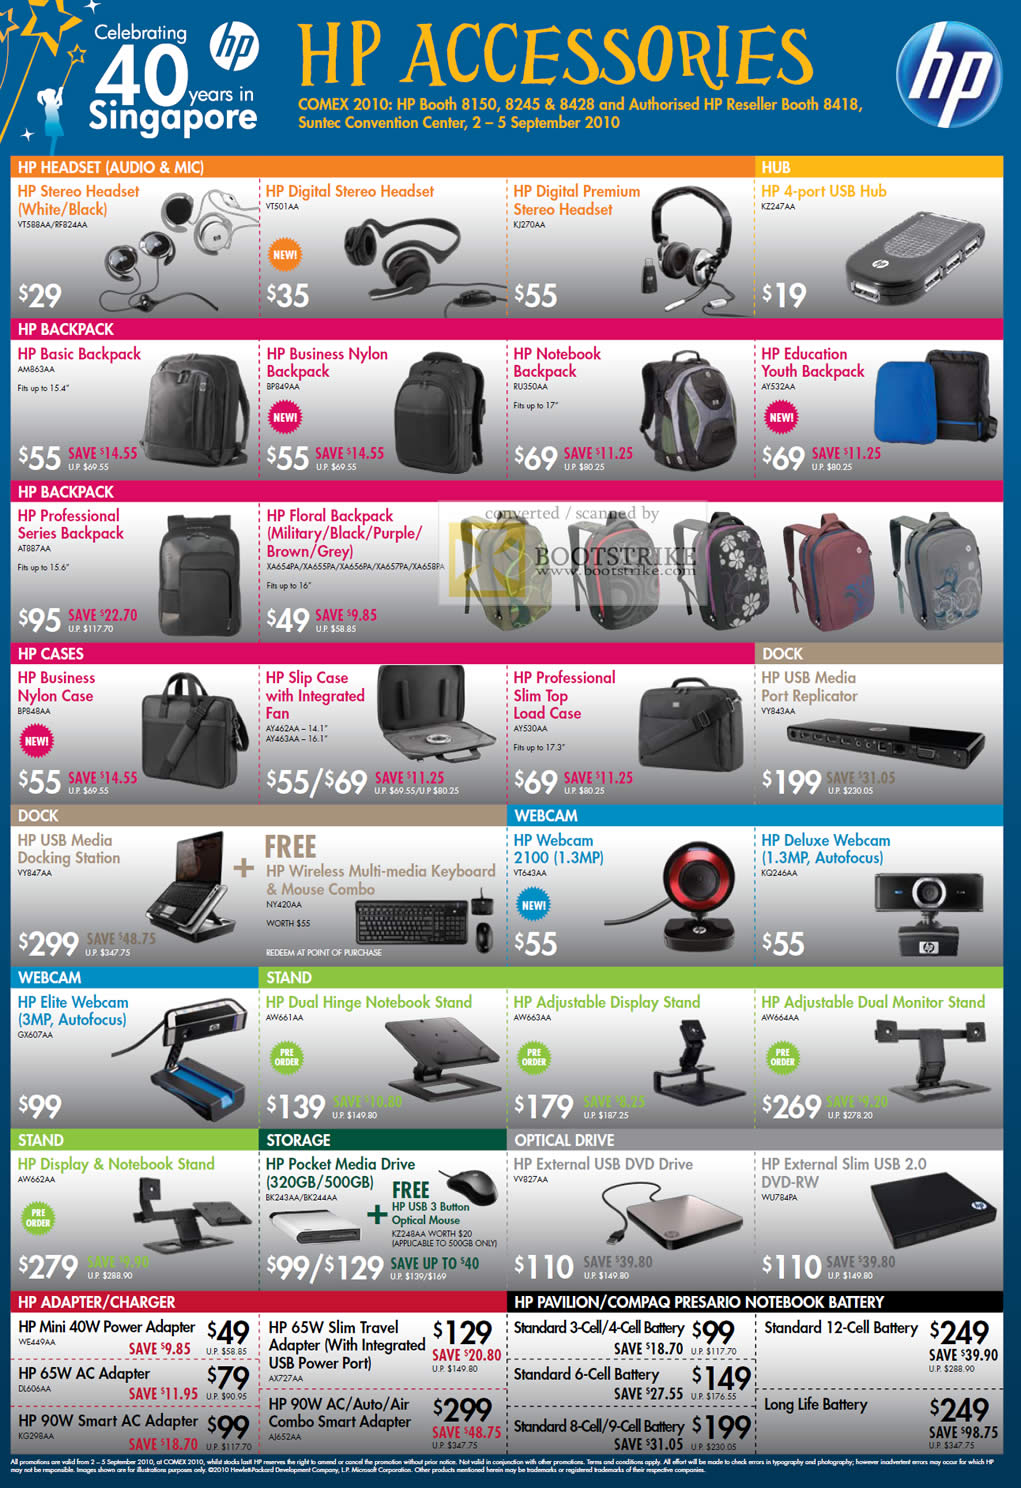 Comex 2010 price list image brochure of HP Accessories Headset Backback Case Dock Webcam Stand External Storage DVD Drive Adapter Charger Battery